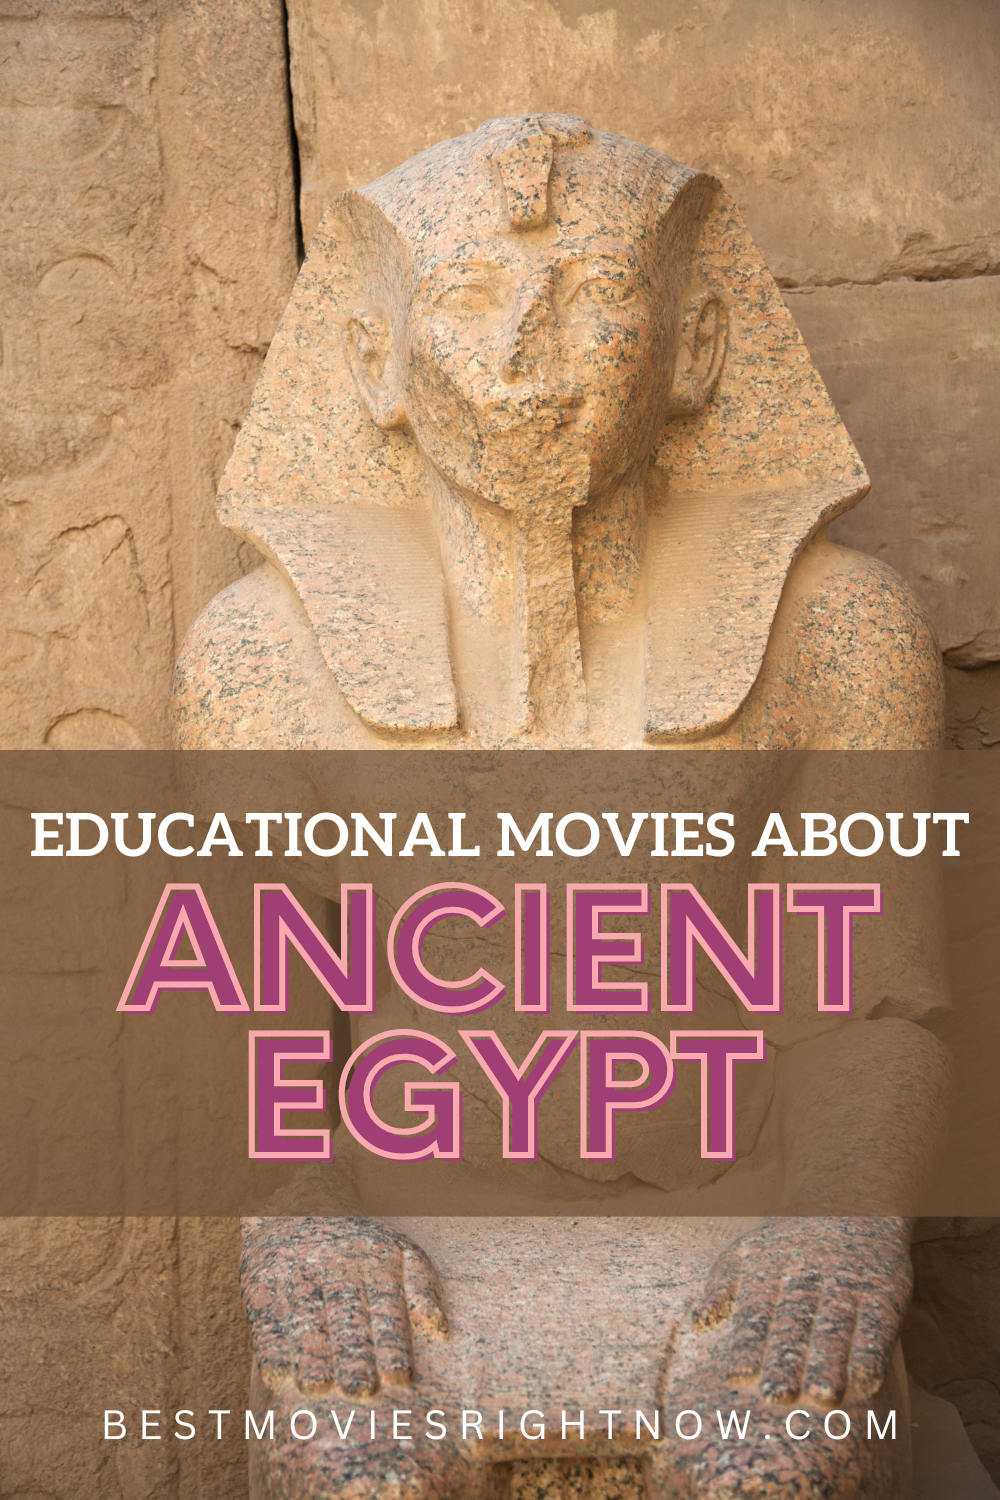 a picture of a Pharaoh's statue with caption "Educational Movies about Ancient Egypt"